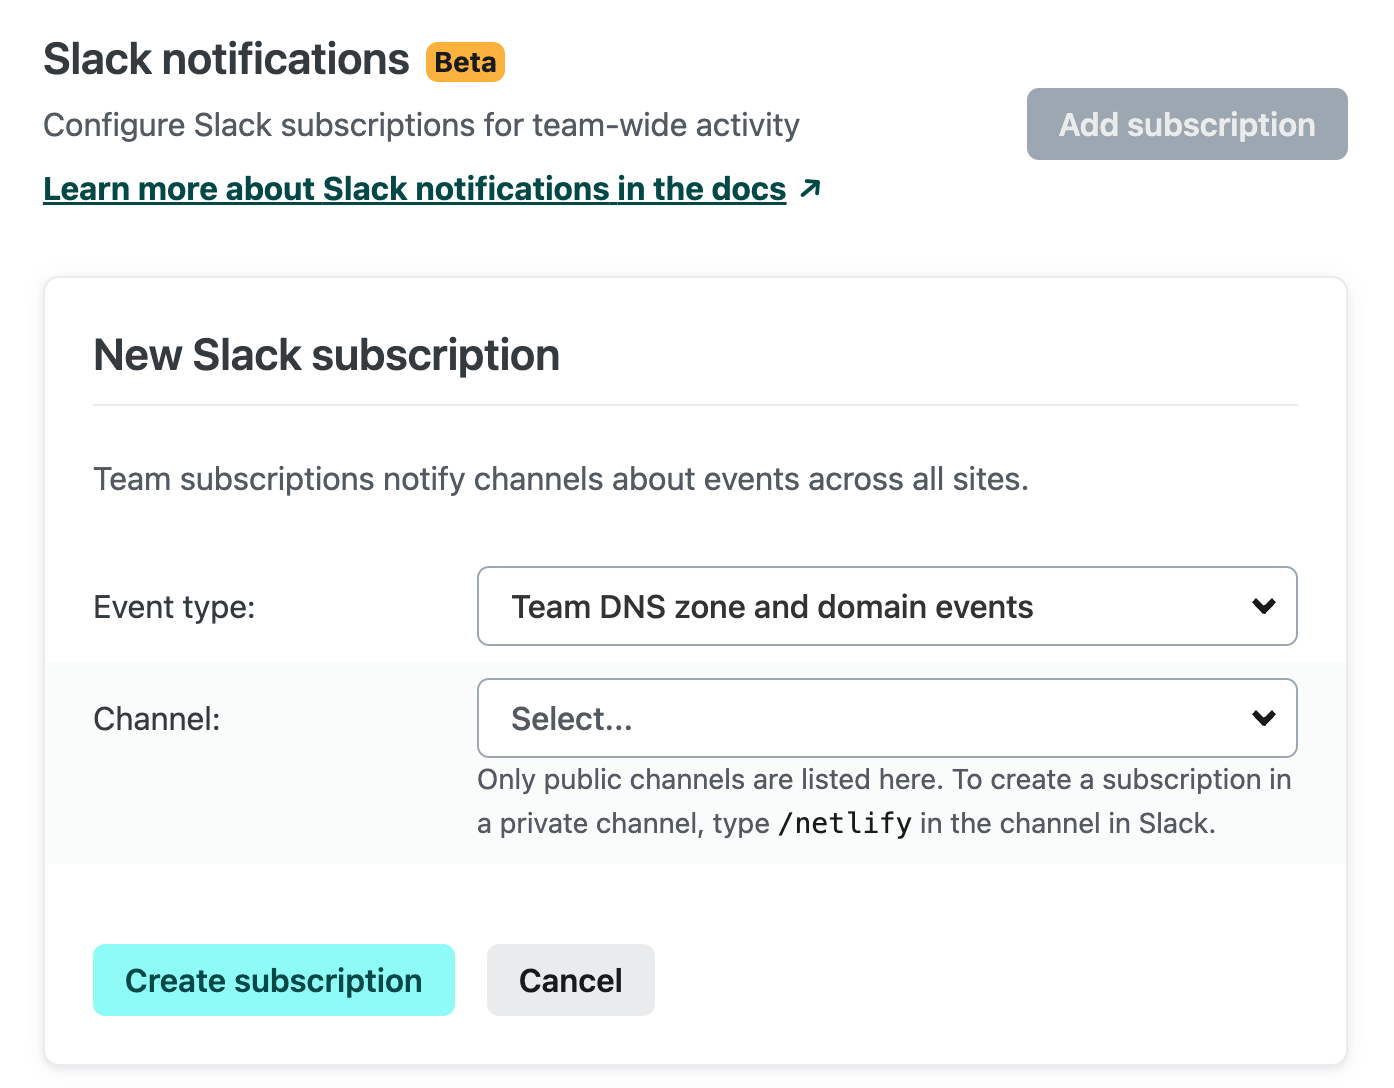 Setting up a new Slack subscription to Team Domains and DNS events